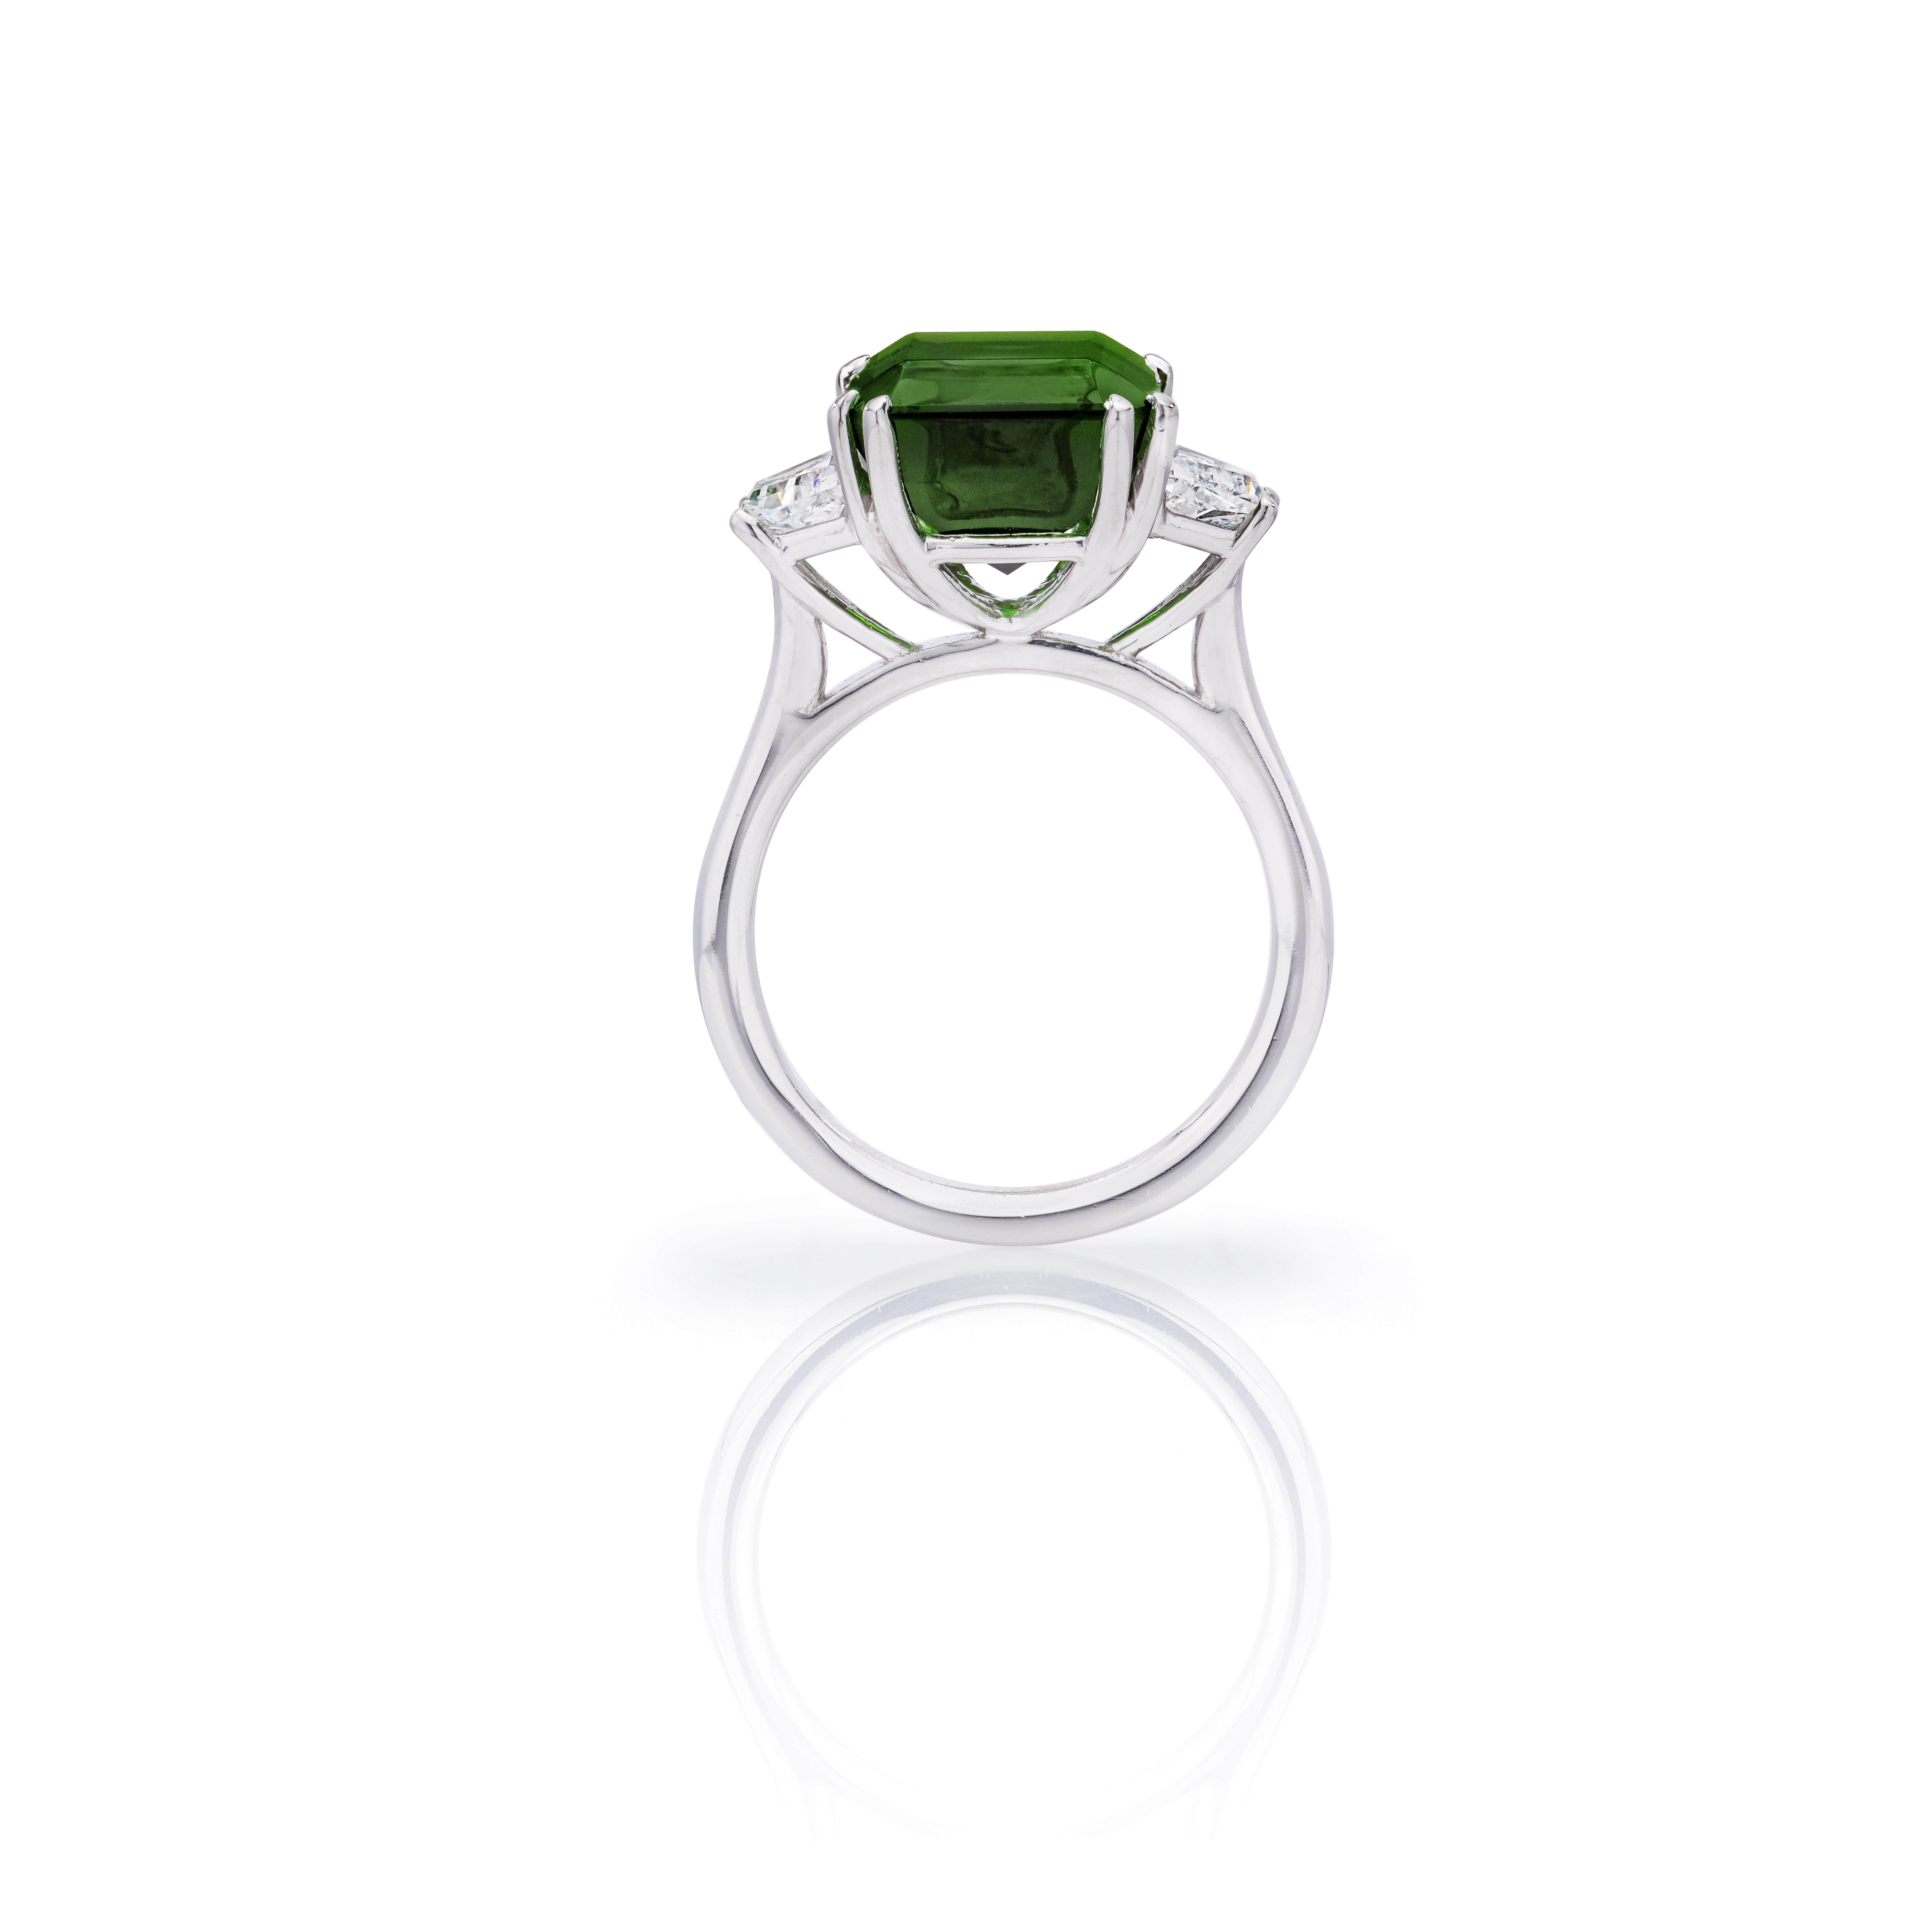 What a rich and classic looking ring!  Sure to get compliments every time you wear it.

Ring Details:

Emerald Cut Chrome Tourmaline (11.7 x 11.3 mm) weighing 6.75 Carats
     Very Slightly Bluish Green (vslbG) in color with dark tone and moderate